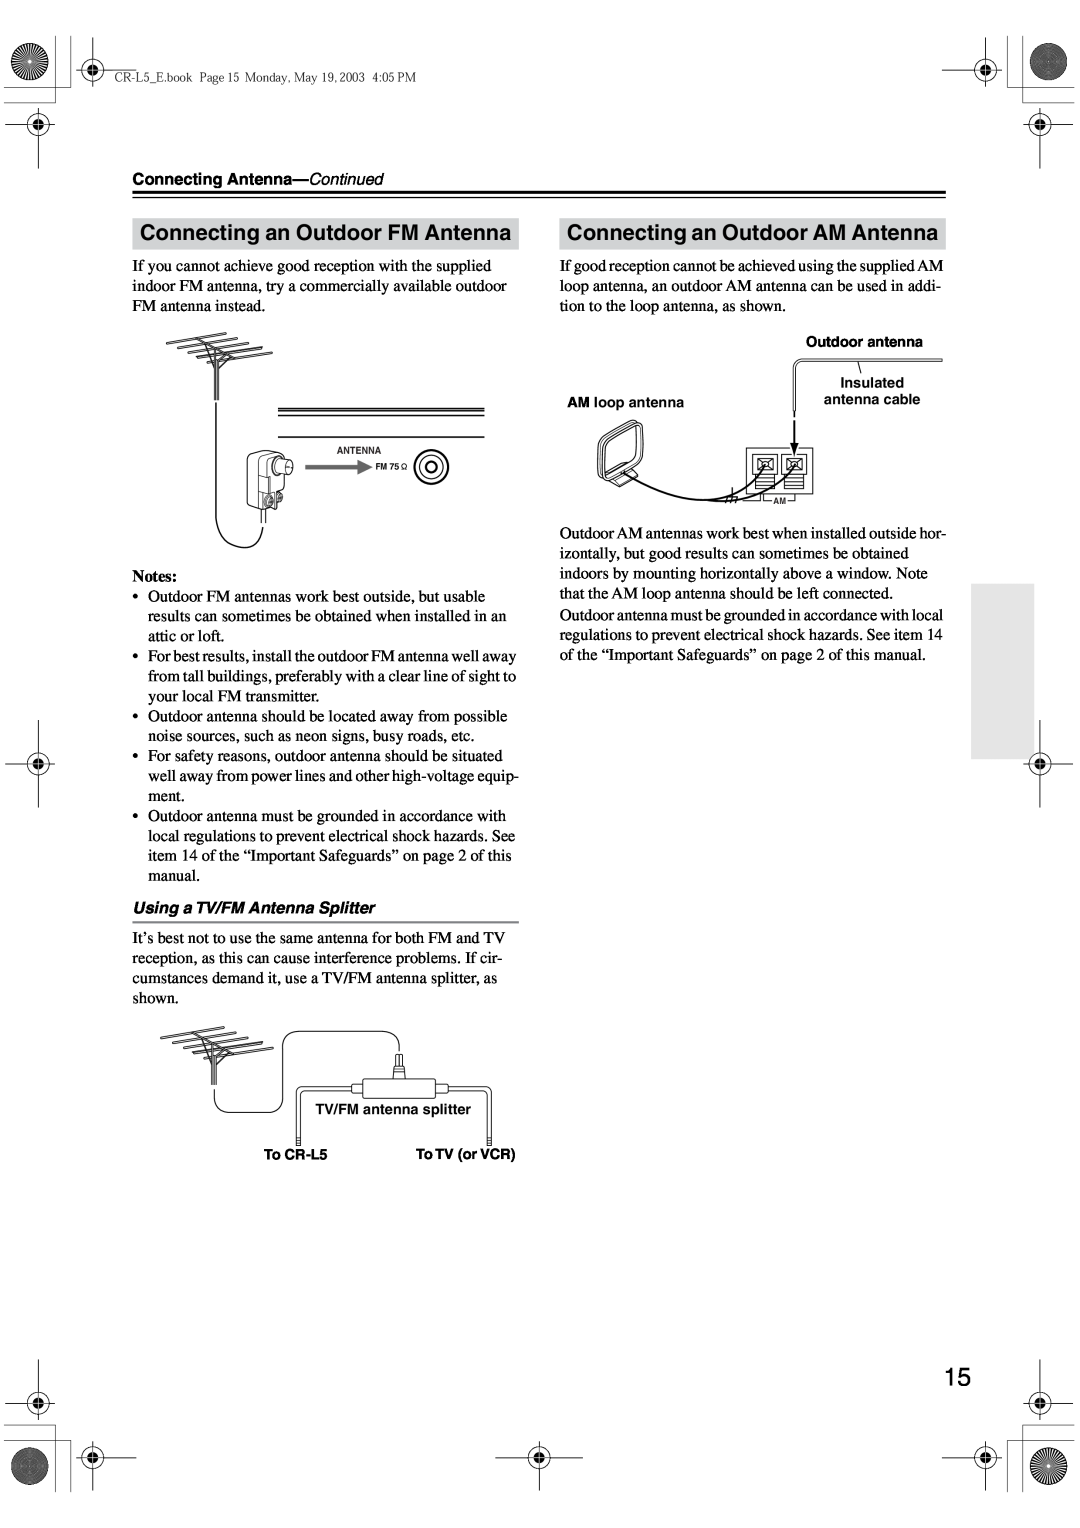 Onkyo CR-L5 Connecting an Outdoor FM Antenna, Connecting an Outdoor AM Antenna, Connecting Antenna-Continued 